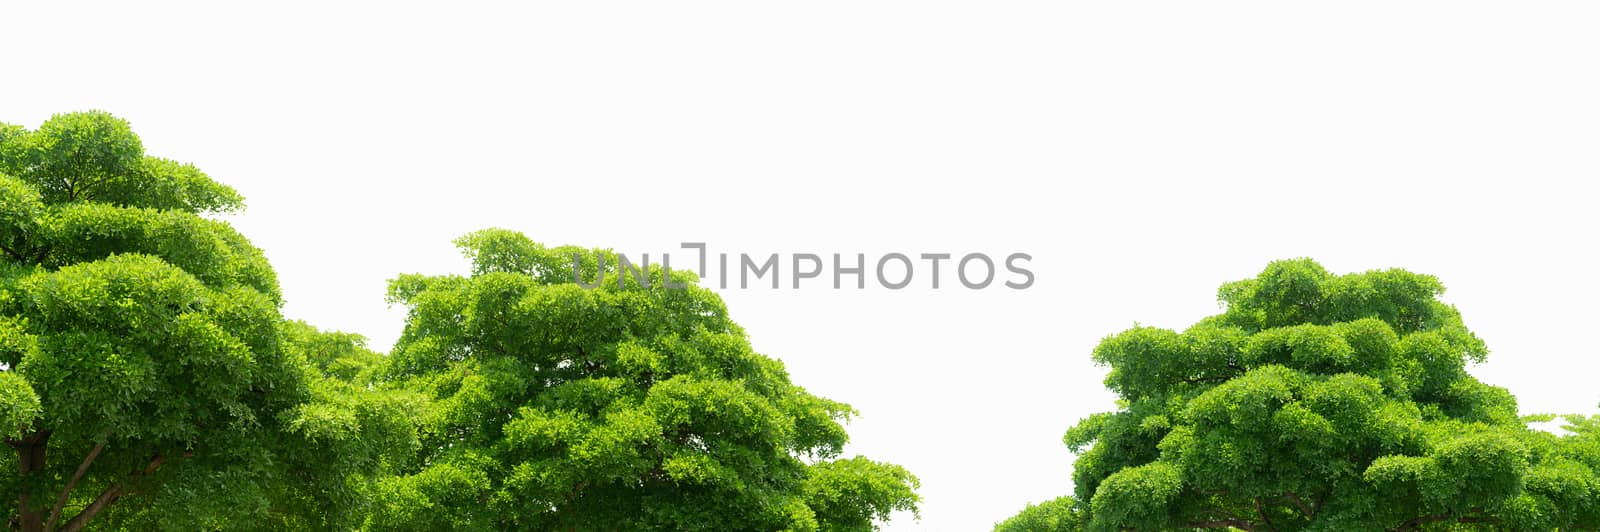 Trees with green leaves isolated on white background. Tree with light green leaves on sunny day. Plants for architecture decorative. Bush of tree with twig and shaft.